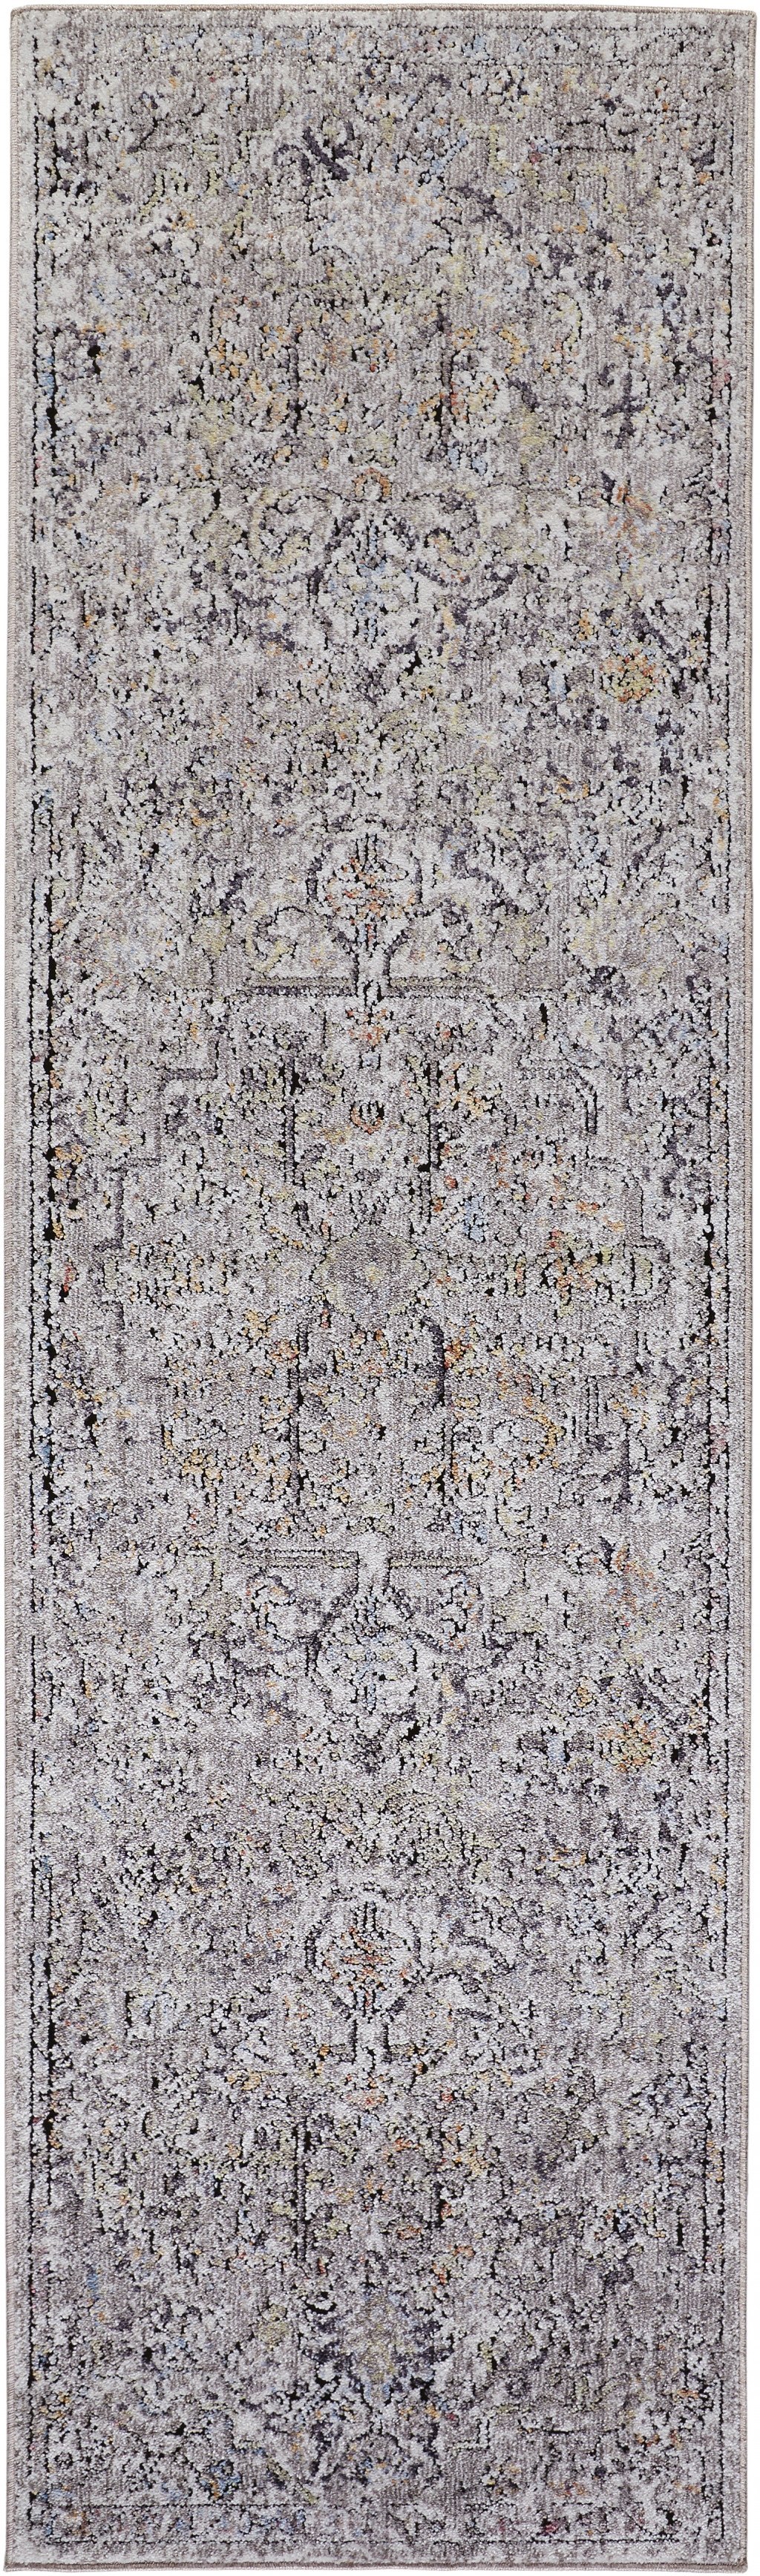 8' Gray Taupe And Yellow Abstract Stain Resistant Runner Rug-512334-1